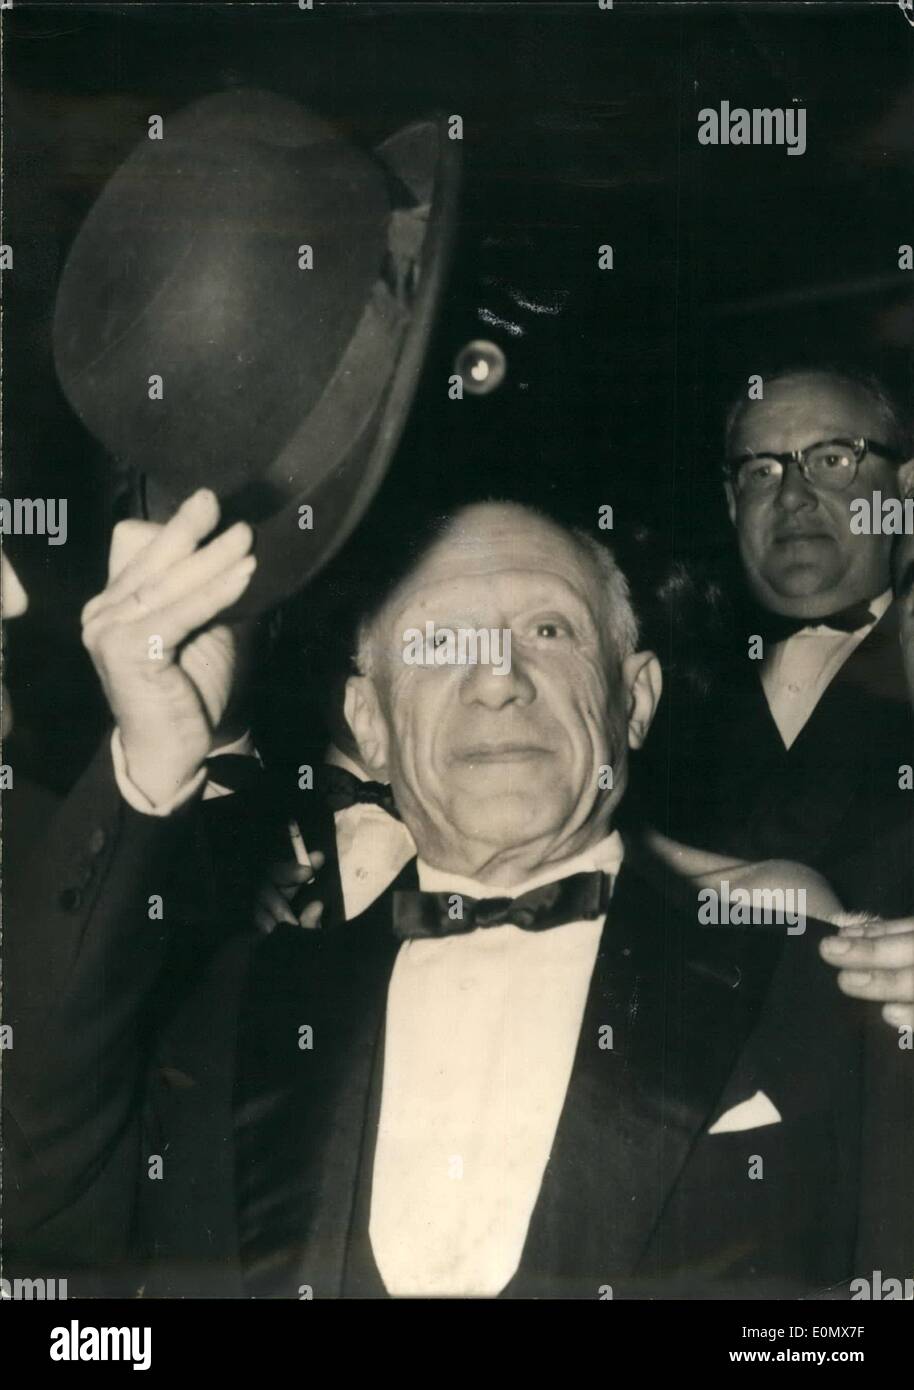 Oct. 10, 1956 - Picasso 75 years old. Photo shows one of the most recent portraits of the famous painter Pablo Picasso who has celebrated his 75th birthday today. Stock Photo